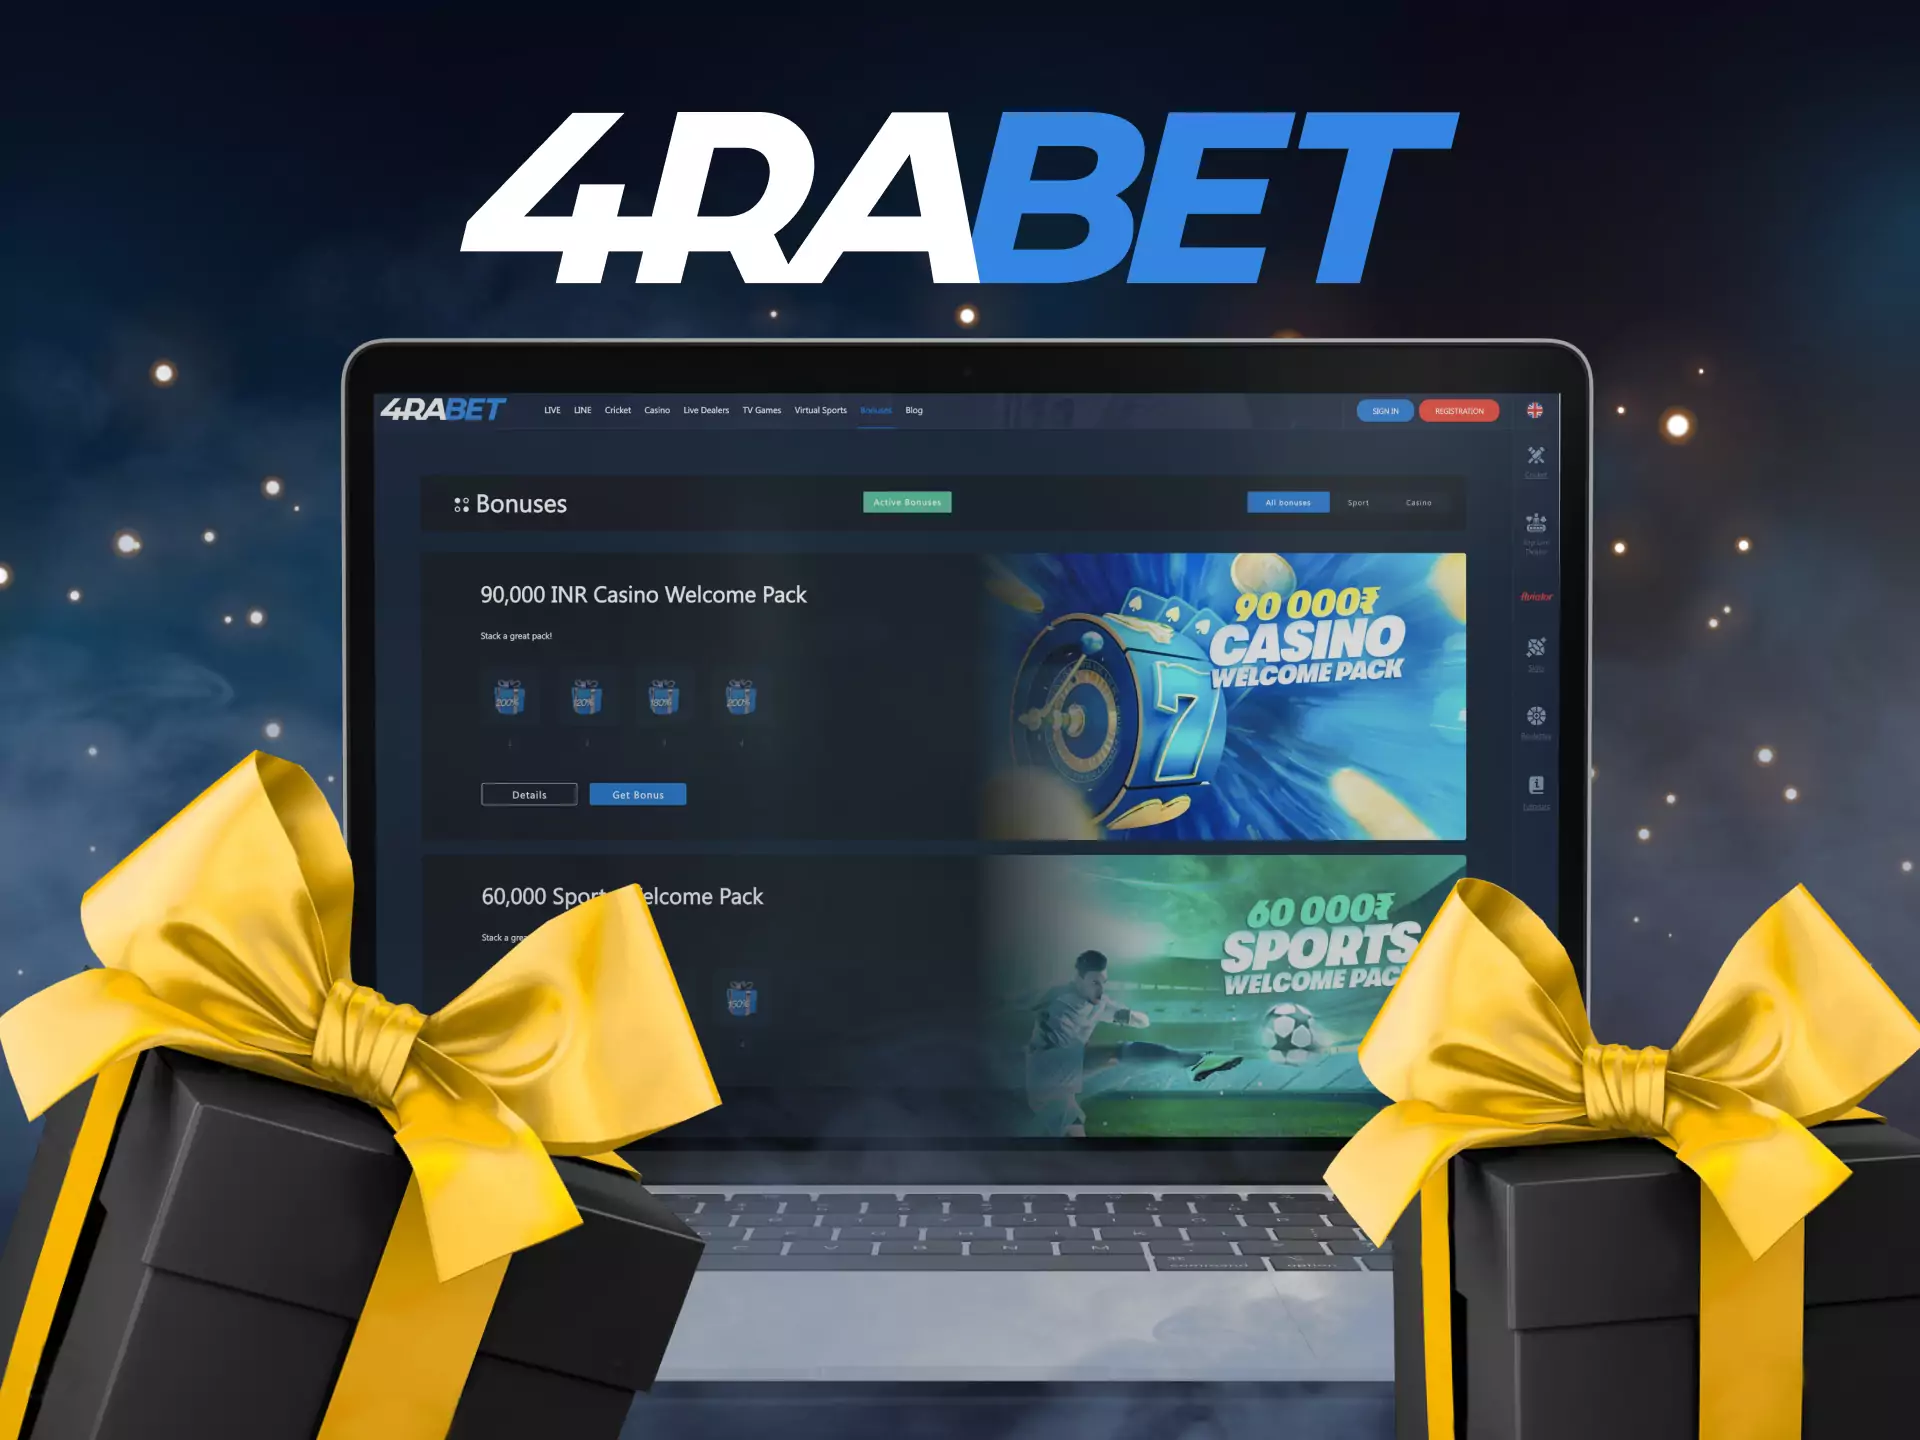 Register with 4rabet and get access to beneficial bonuses to play profitably.